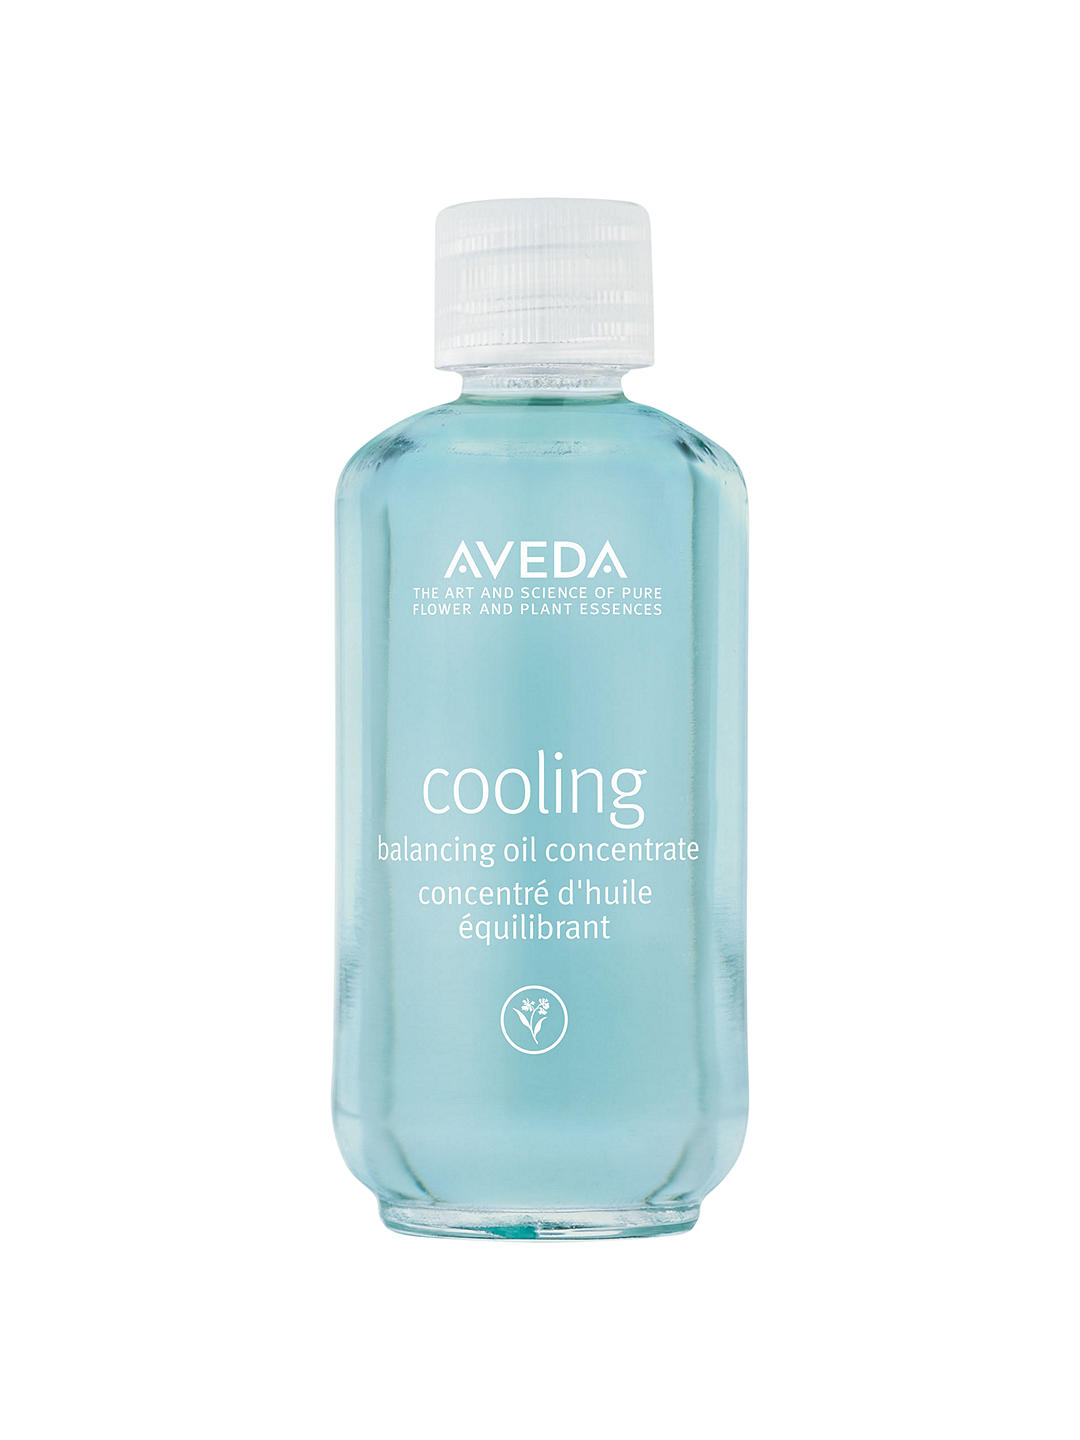 Aveda Cool Balancing Oil Concentrate Treatment, 50ml 1